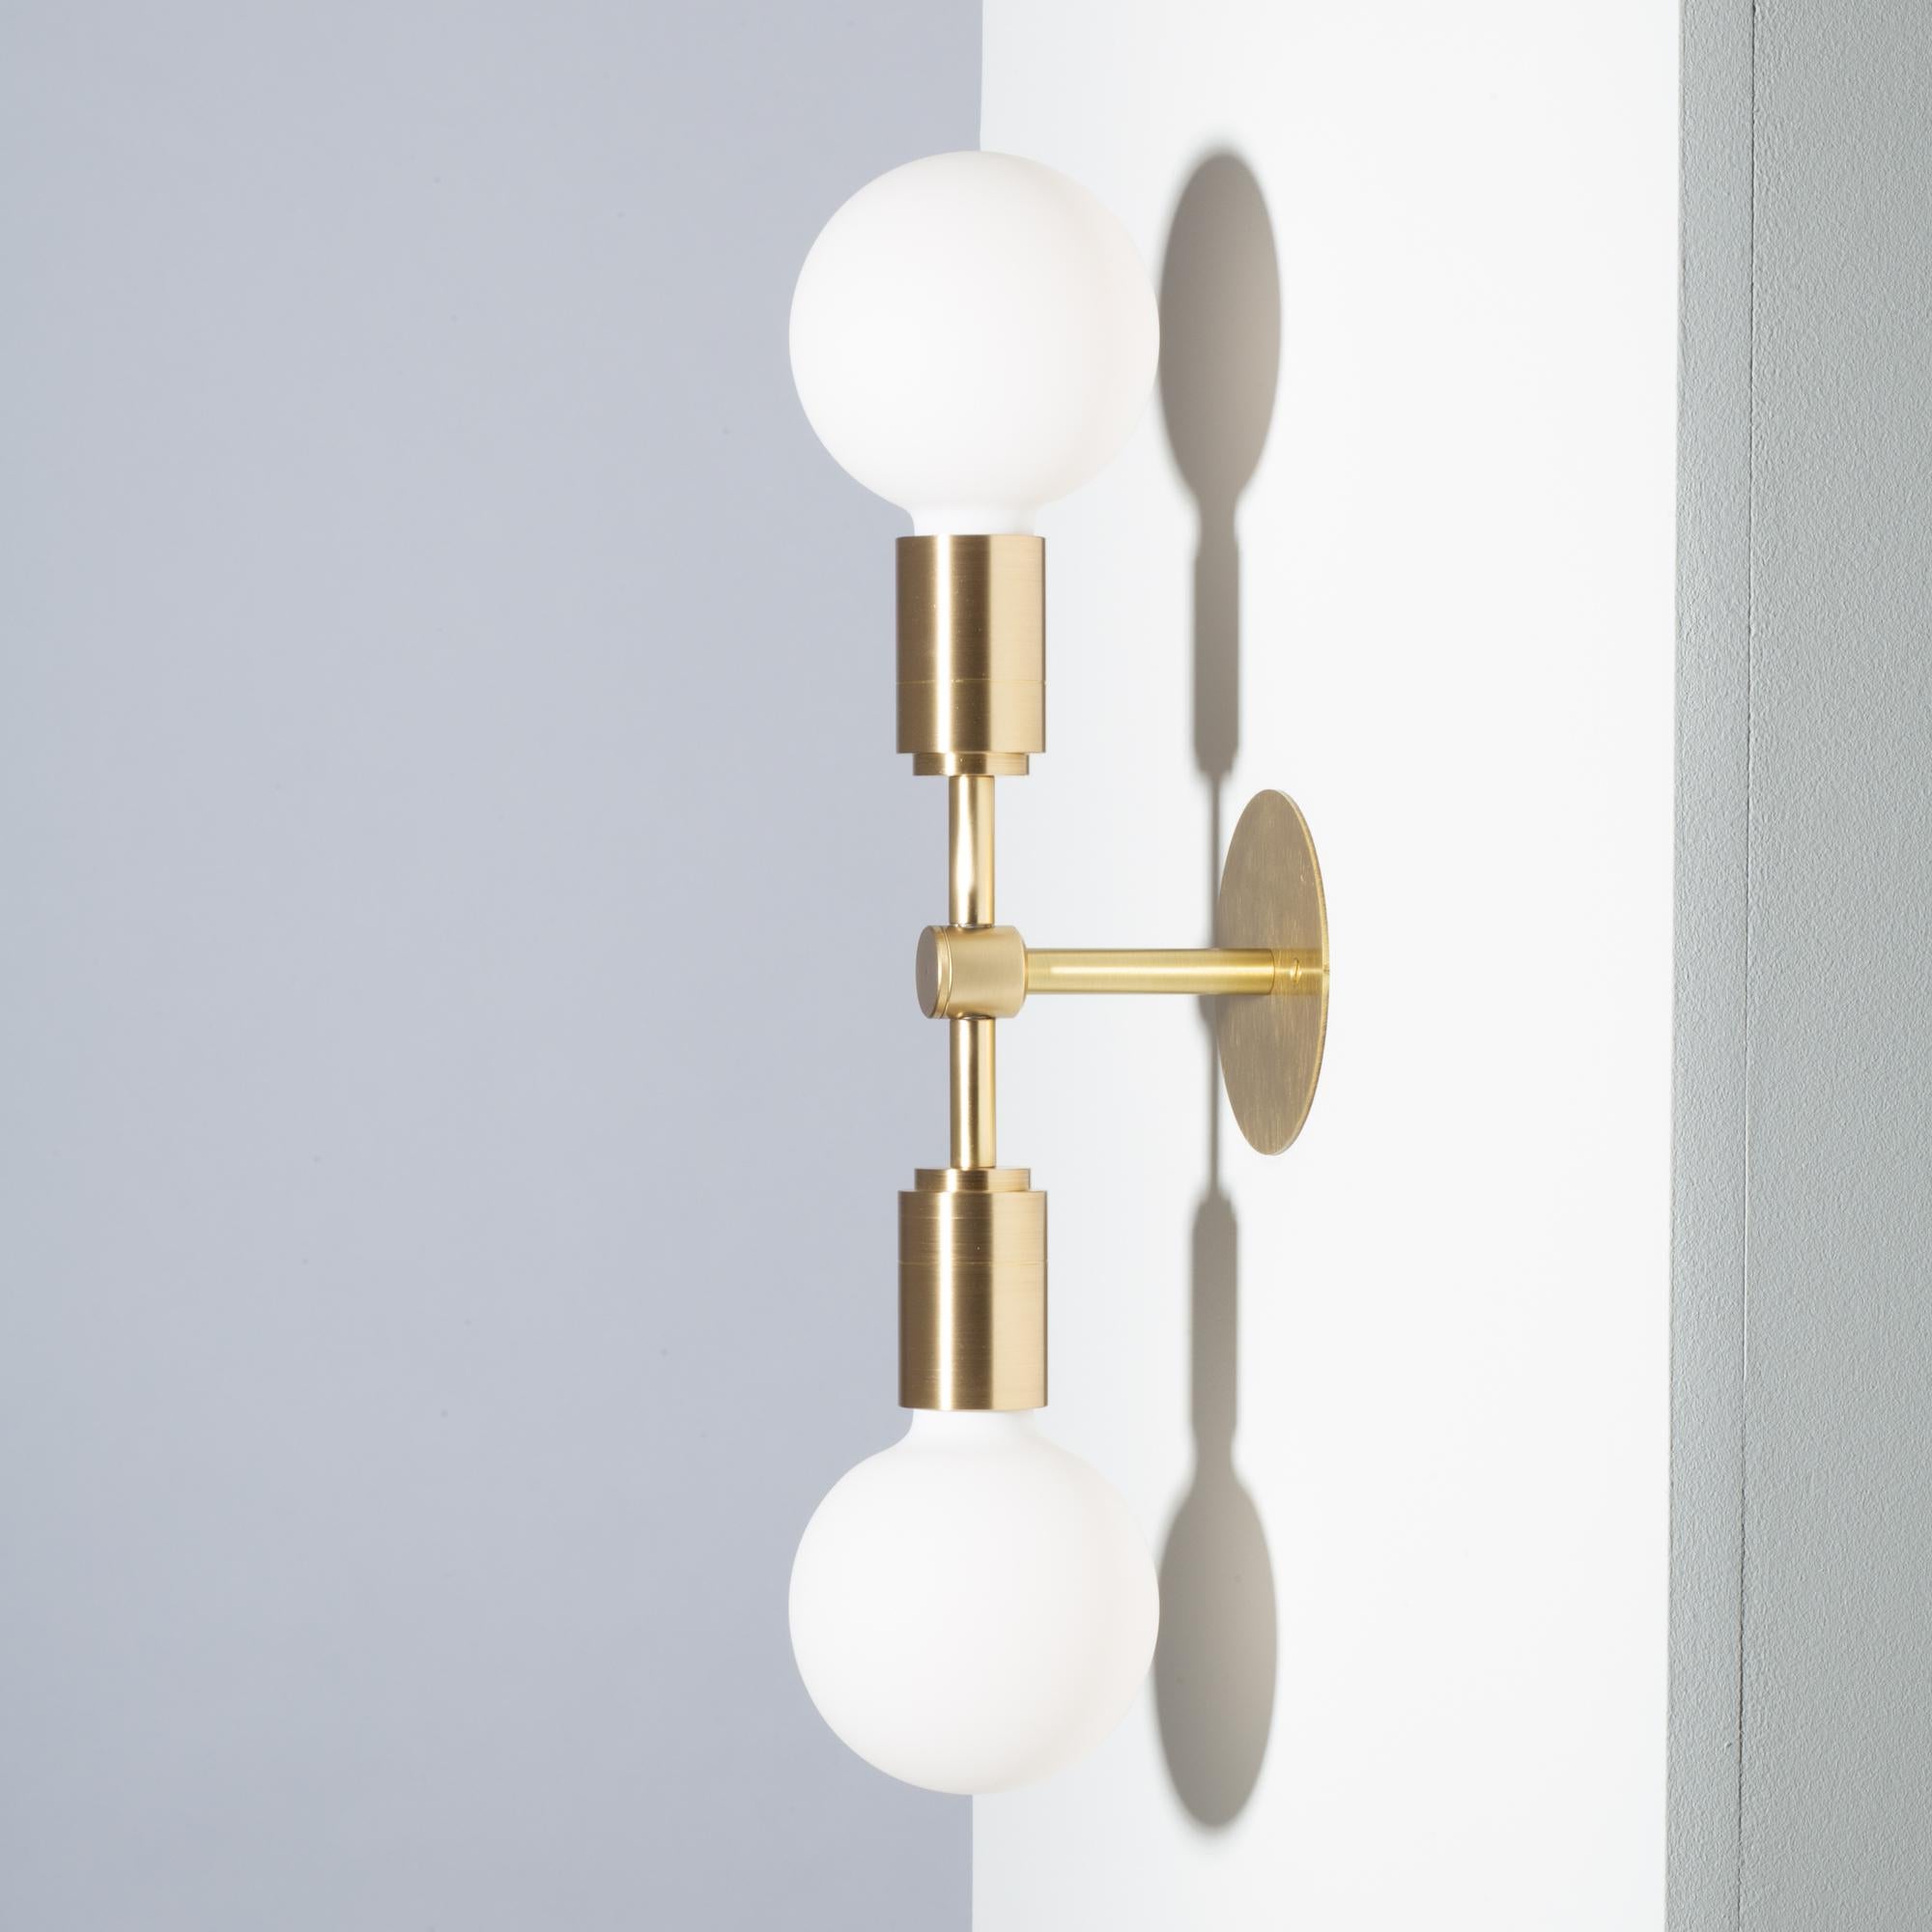 Double Sphere III Wall Light 
Brushed Brass Wall Plate 
2000K - 2800K  95CRI
1200 Dim to Warm Lumens 
Flush mount or Surface mount. 
Plug in Dimmable wired available on request. 
Sphere III Bulbs Included
Custom Finishes and options Available on